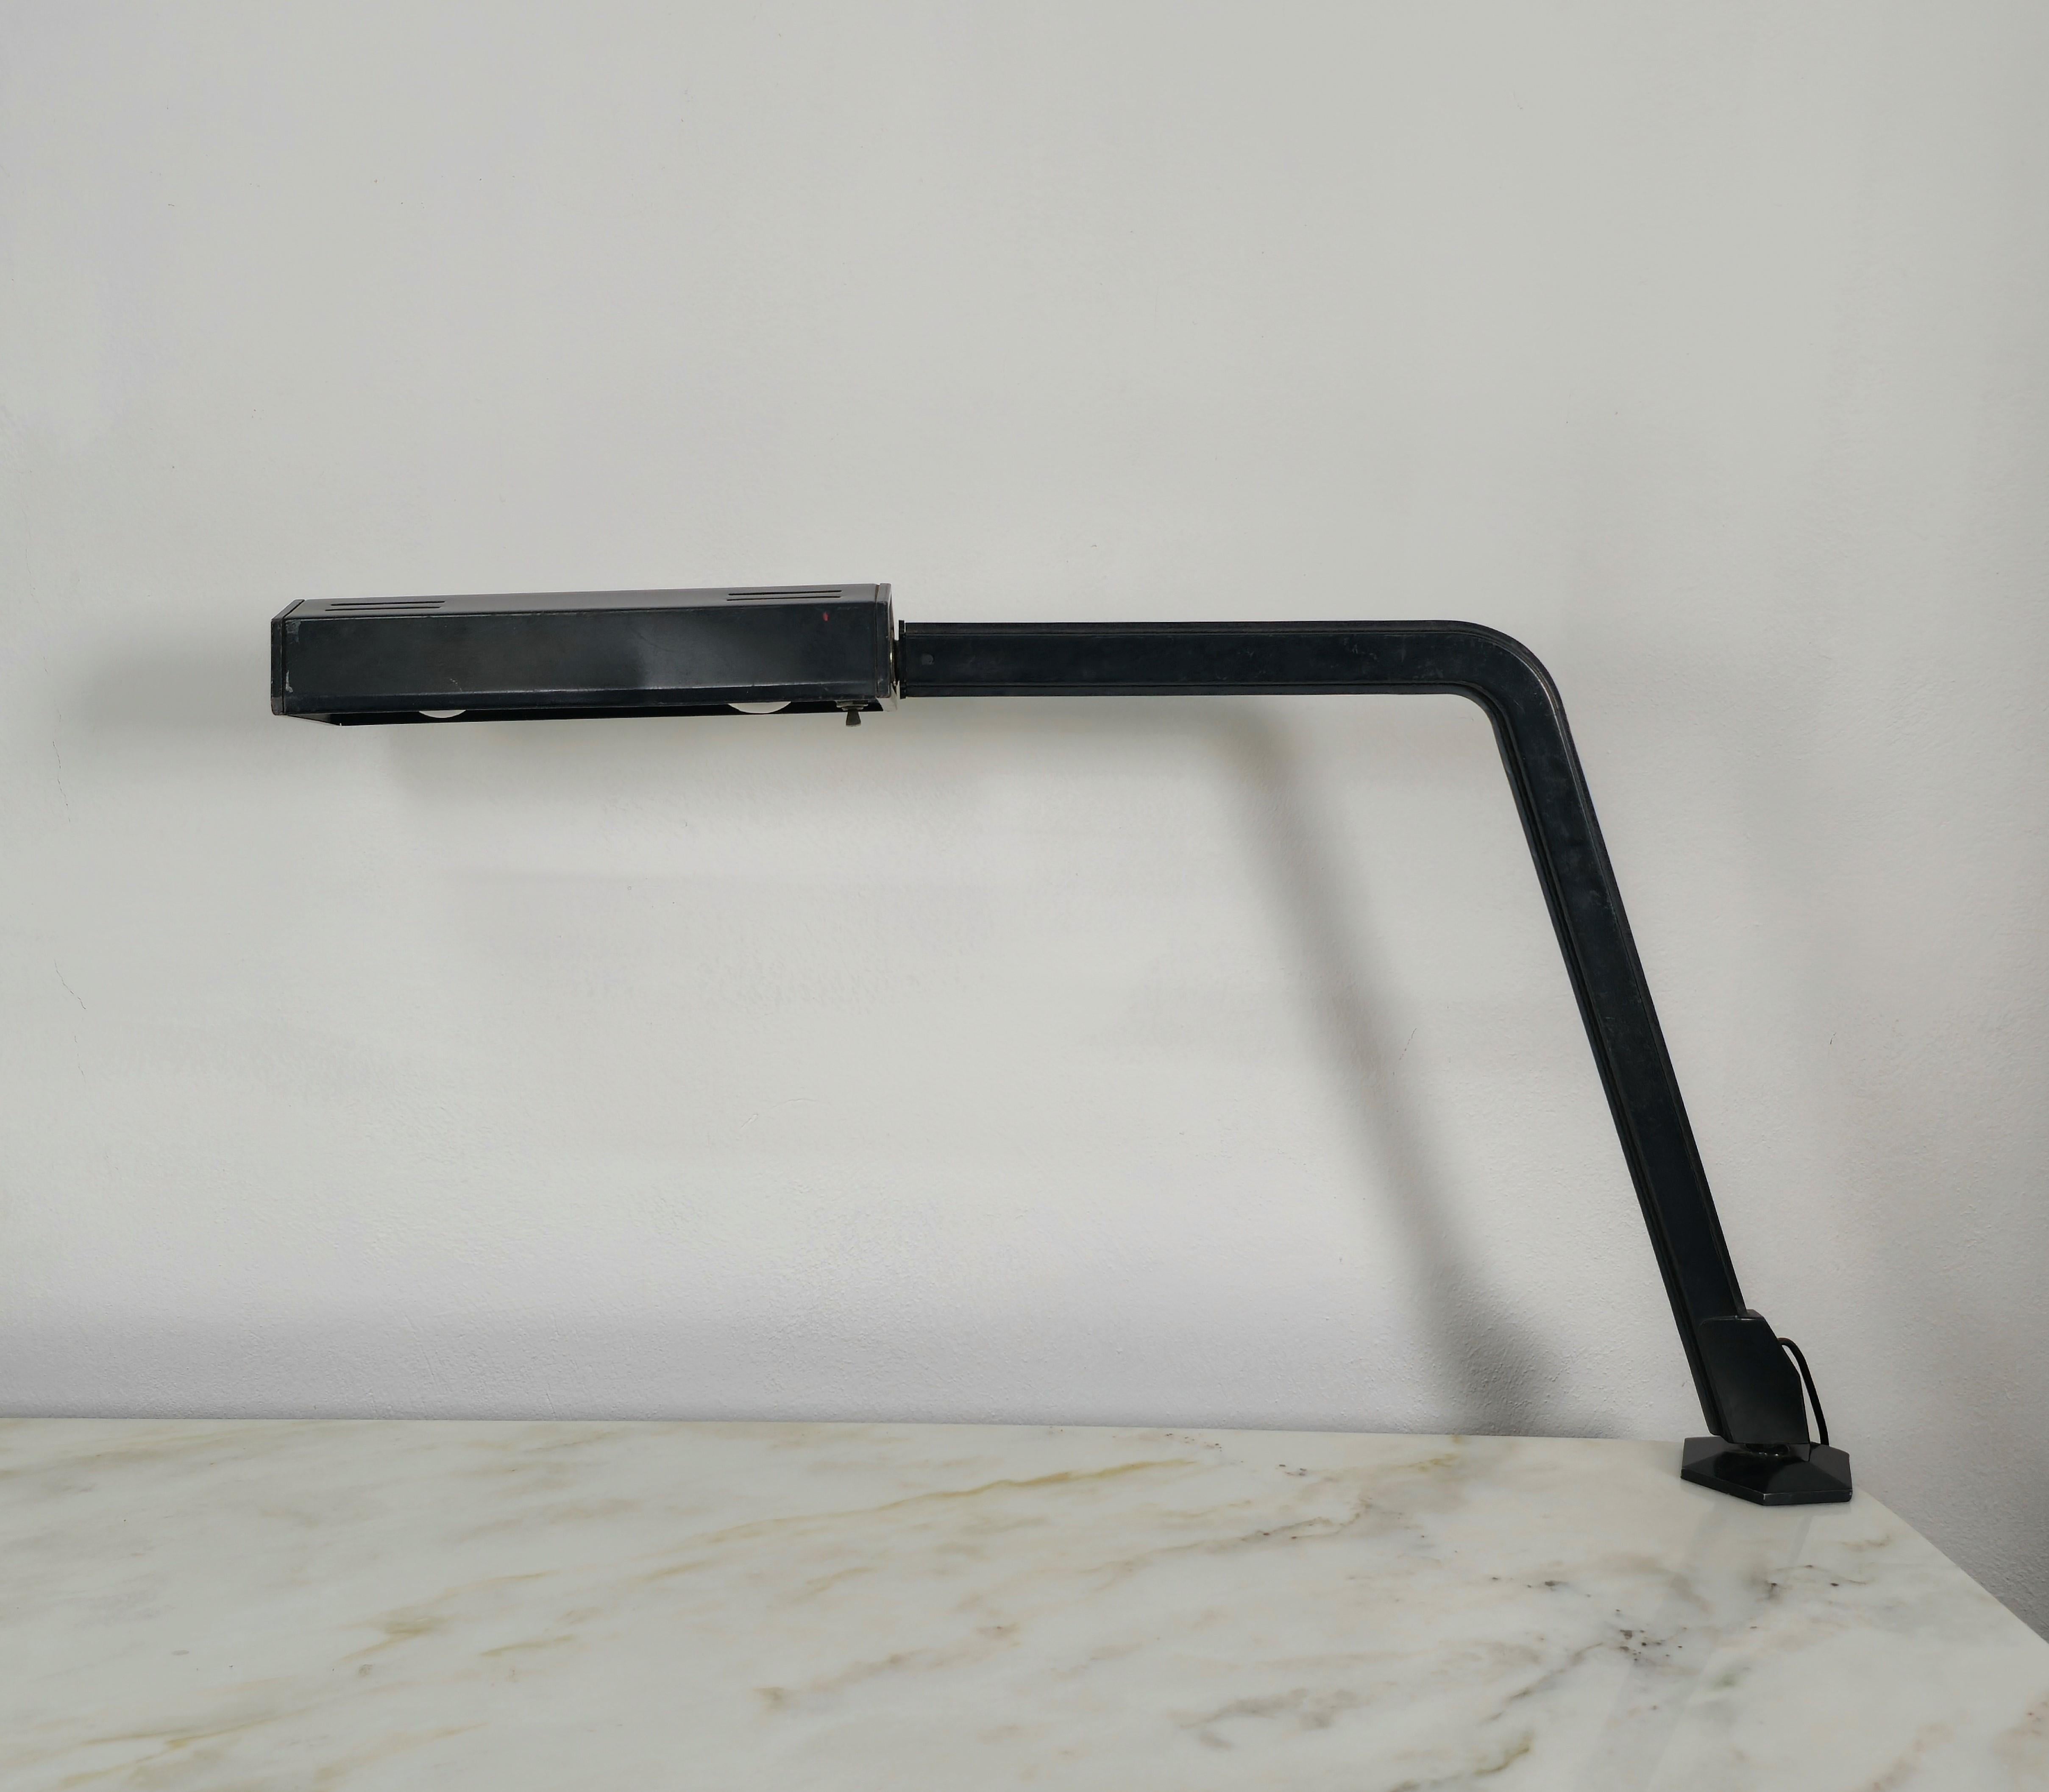 Rare table or desk lamp designed by the BBPR architects' studio and produced in the 1960s by Olivetti.
The lamp was made of black lacquered metal with the adjustable diffuser and extendable mechanism in chromed metal.


Note: We try to offer our